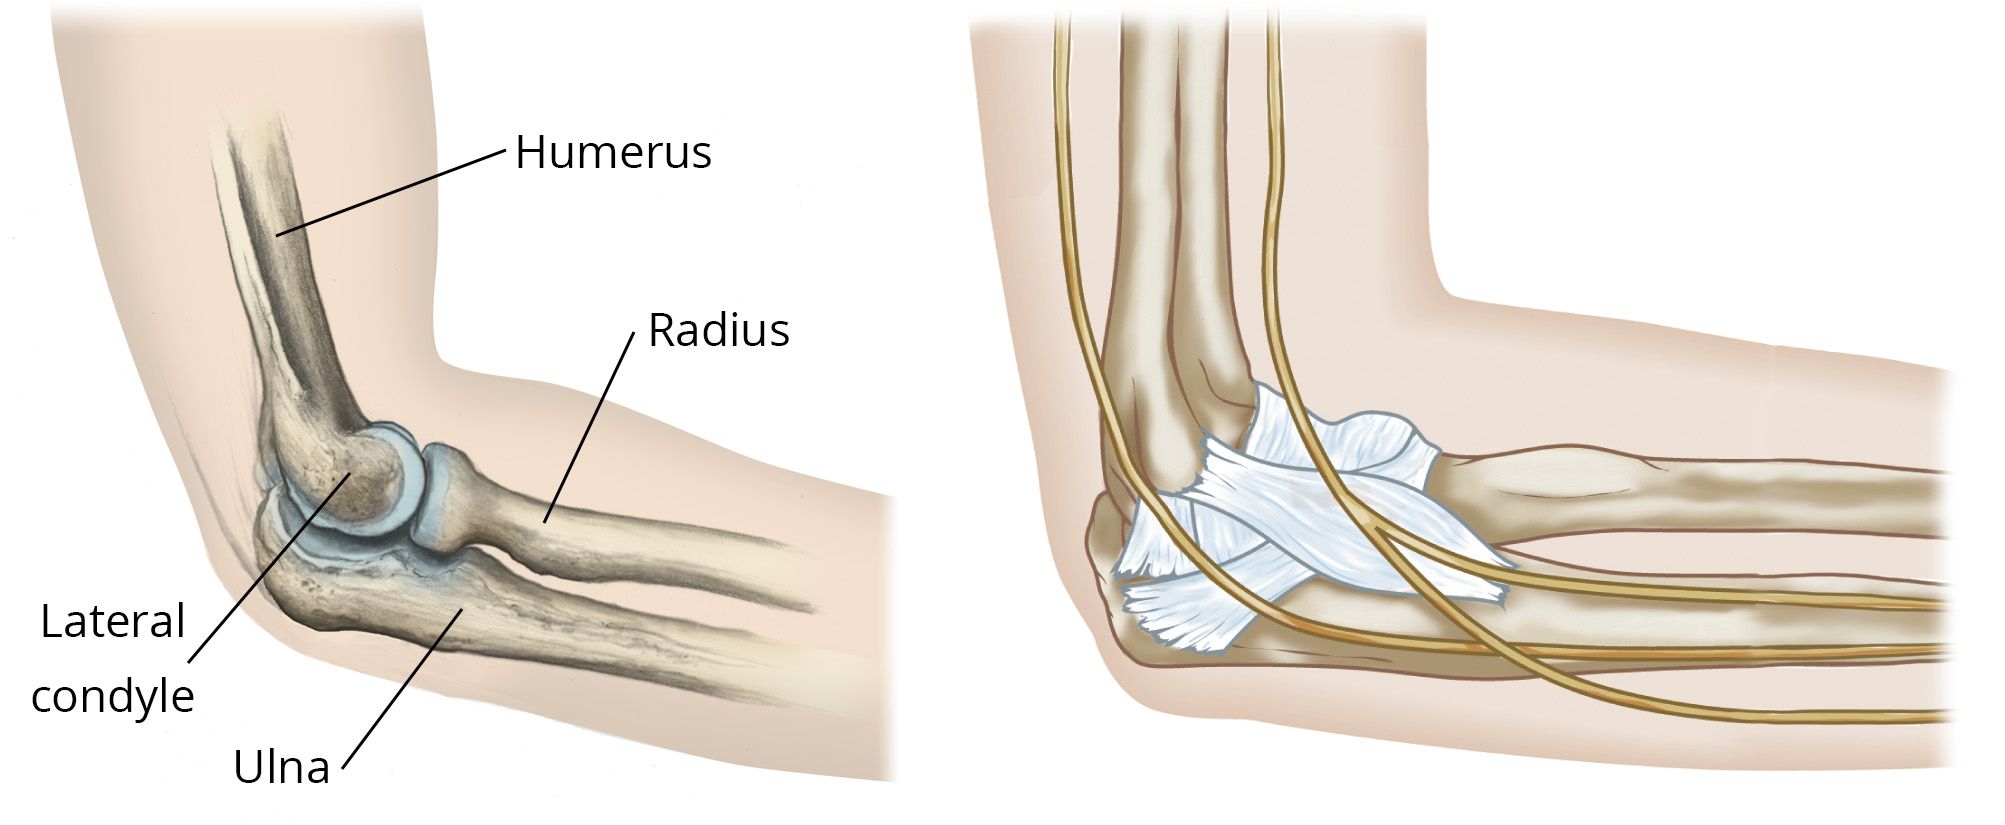 Elbow Fractures in Children - OrthoInfo - AAOS